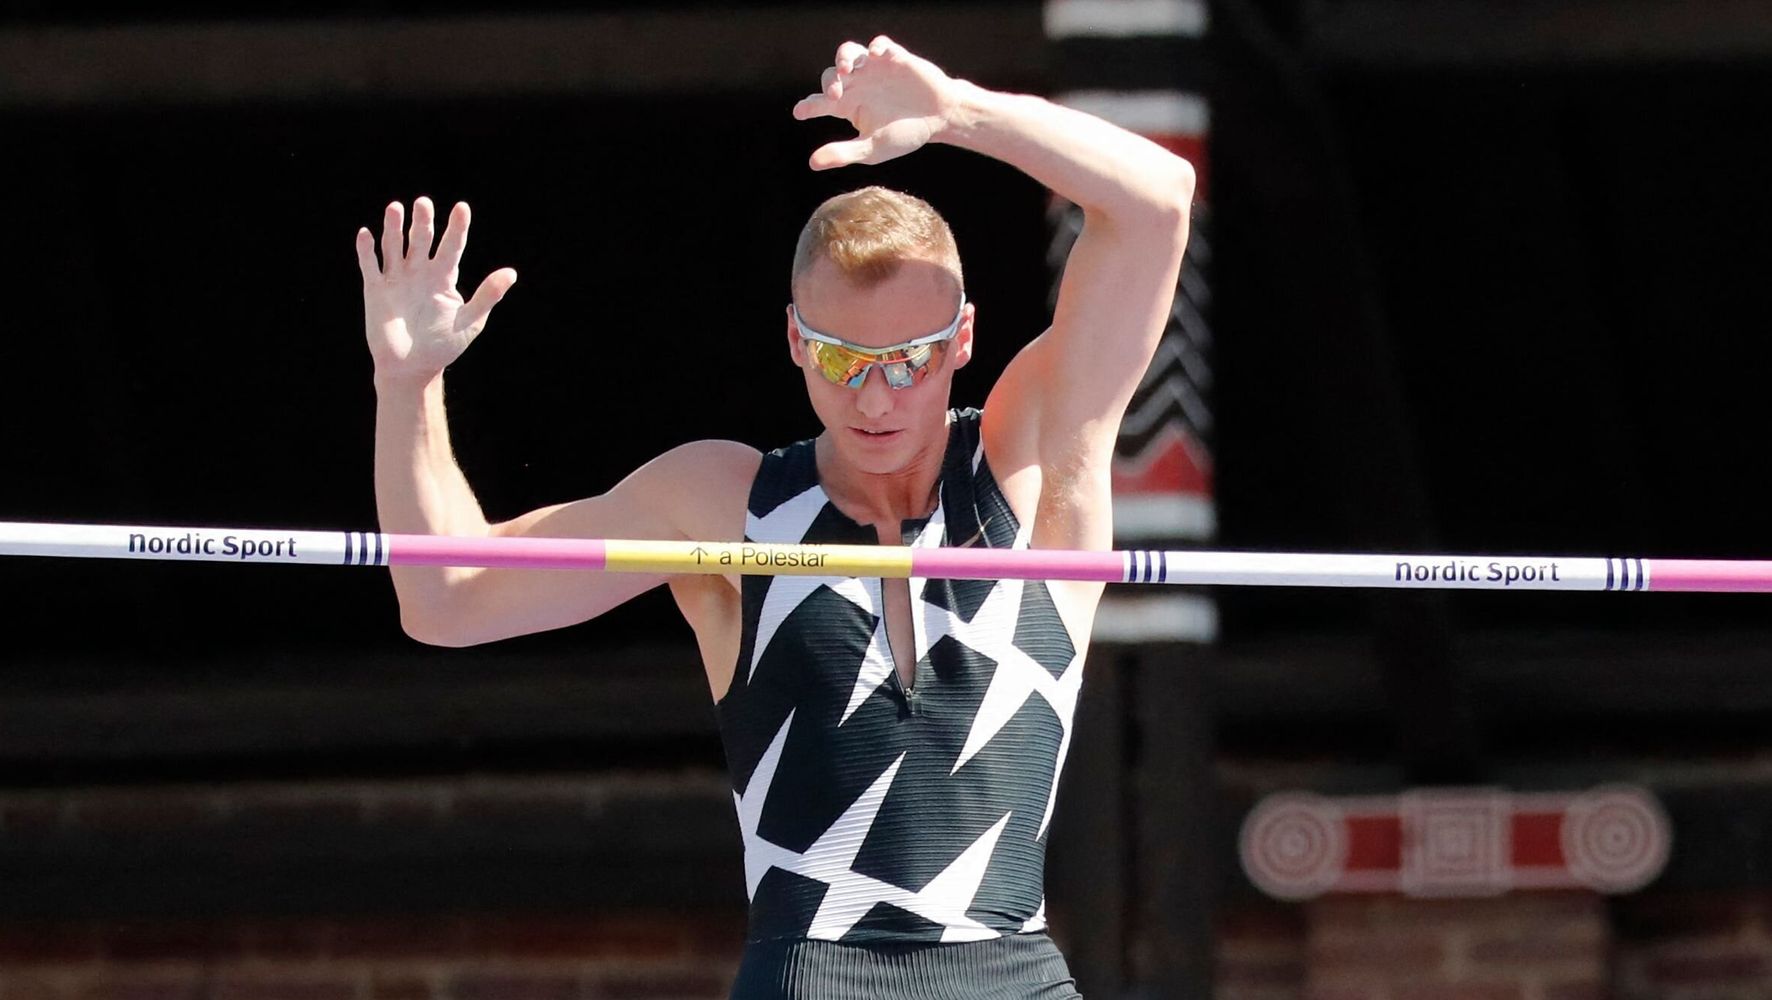 U.S. Pole Vaulter Out Of Tokyo Olympics After Testing Positive For COVID-19